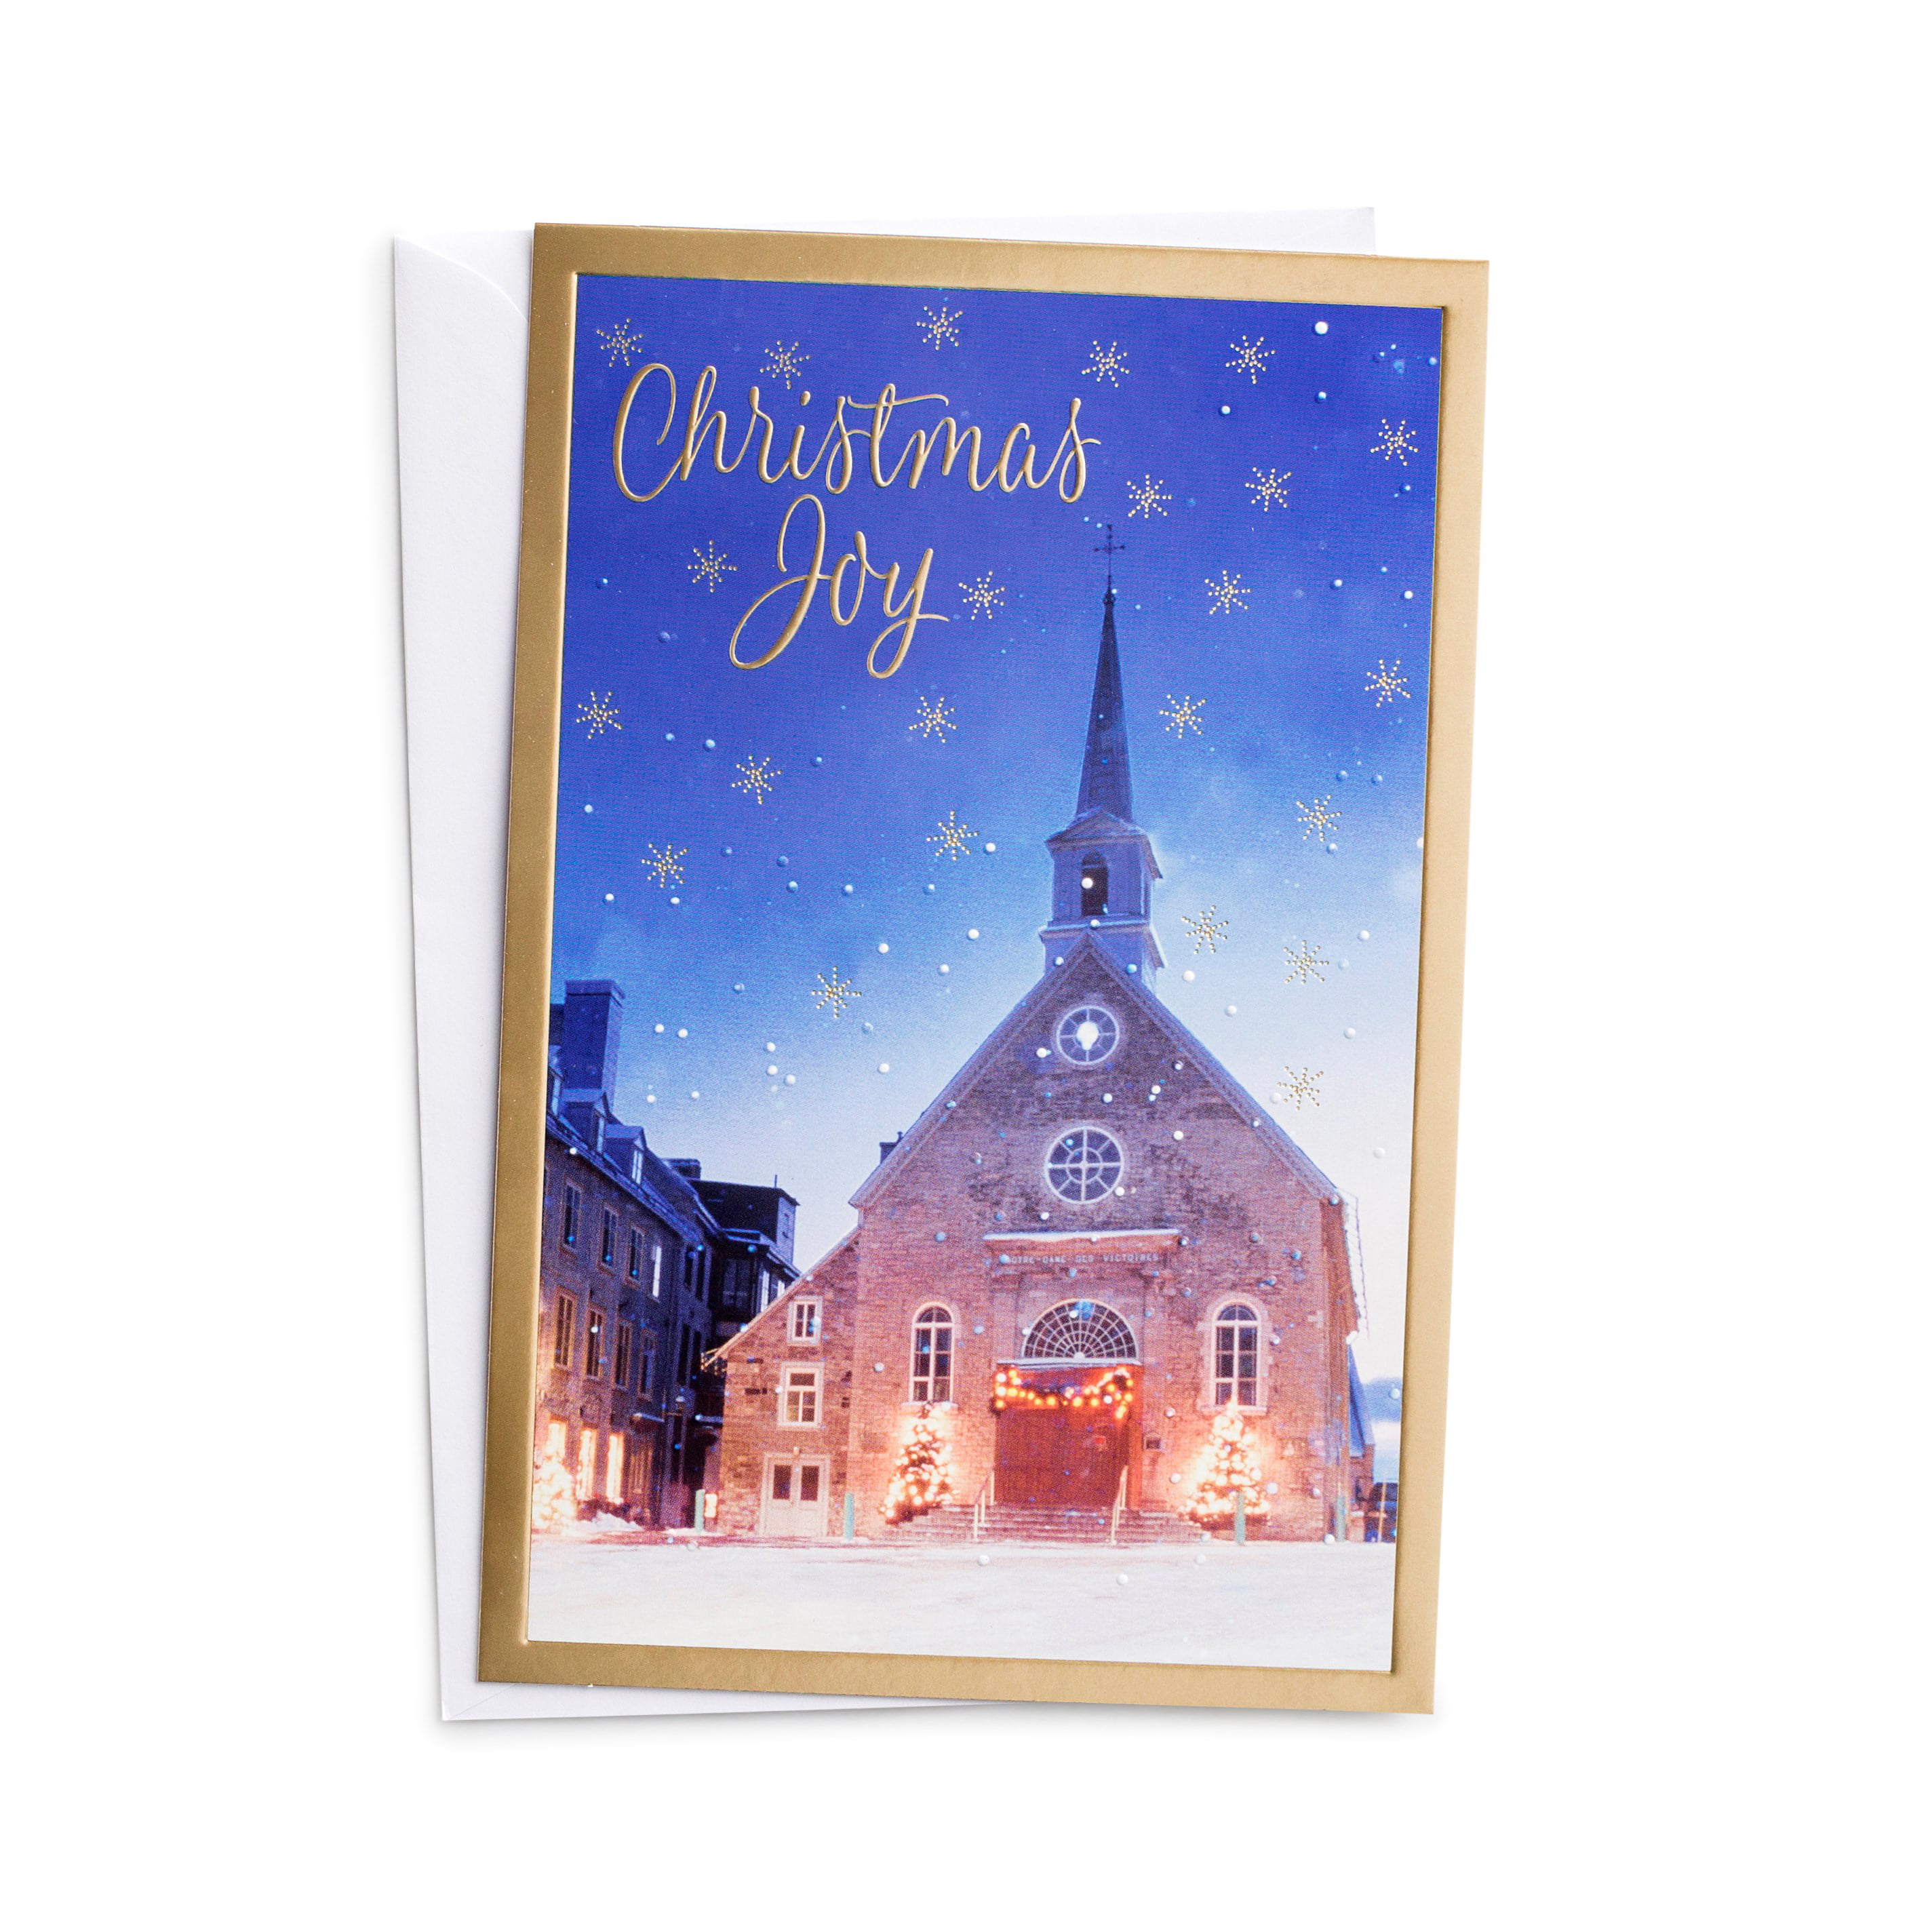 Christian Christmas cards by Just Cards Direct Worship Him 10 Christmas cards in pack with Bible verse Psalm 95:6 inside these foiled religious Christmas cards